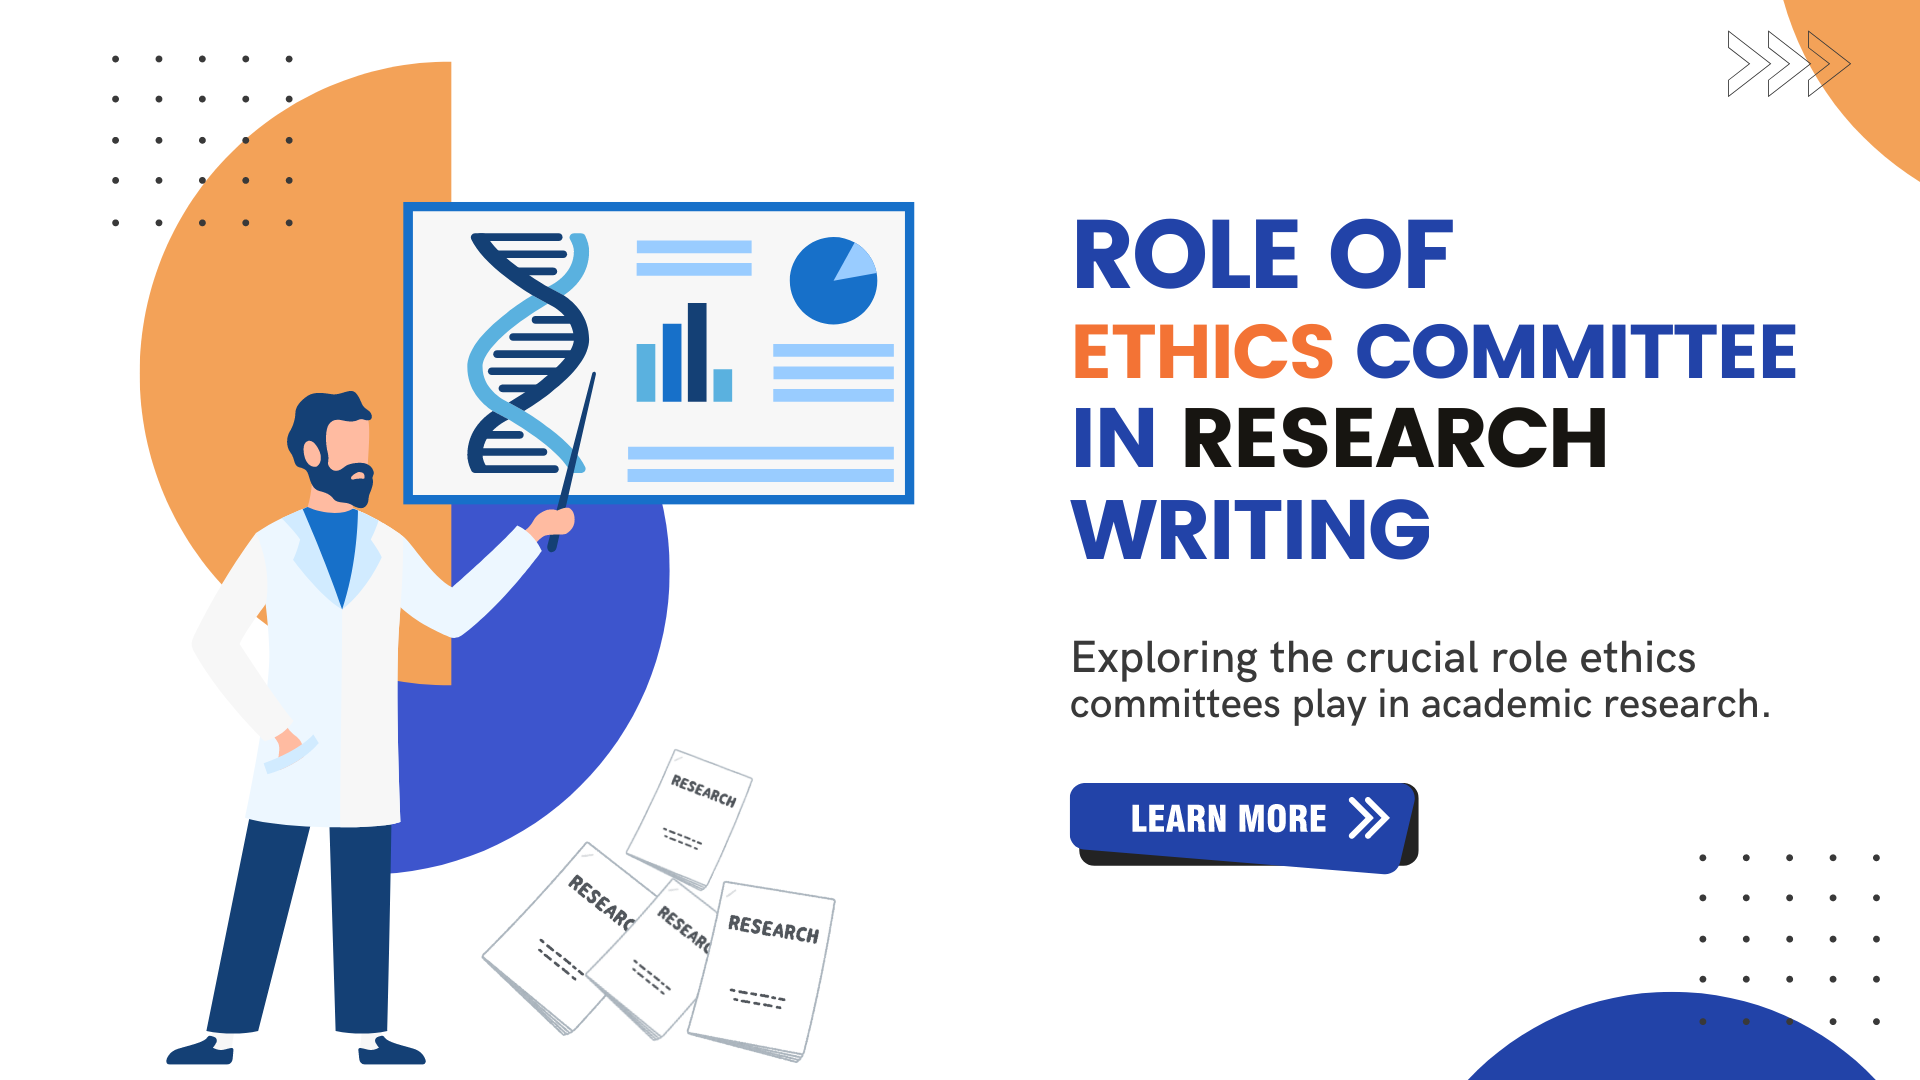 Comprehending the Role of Ethics Committee in Research Writing